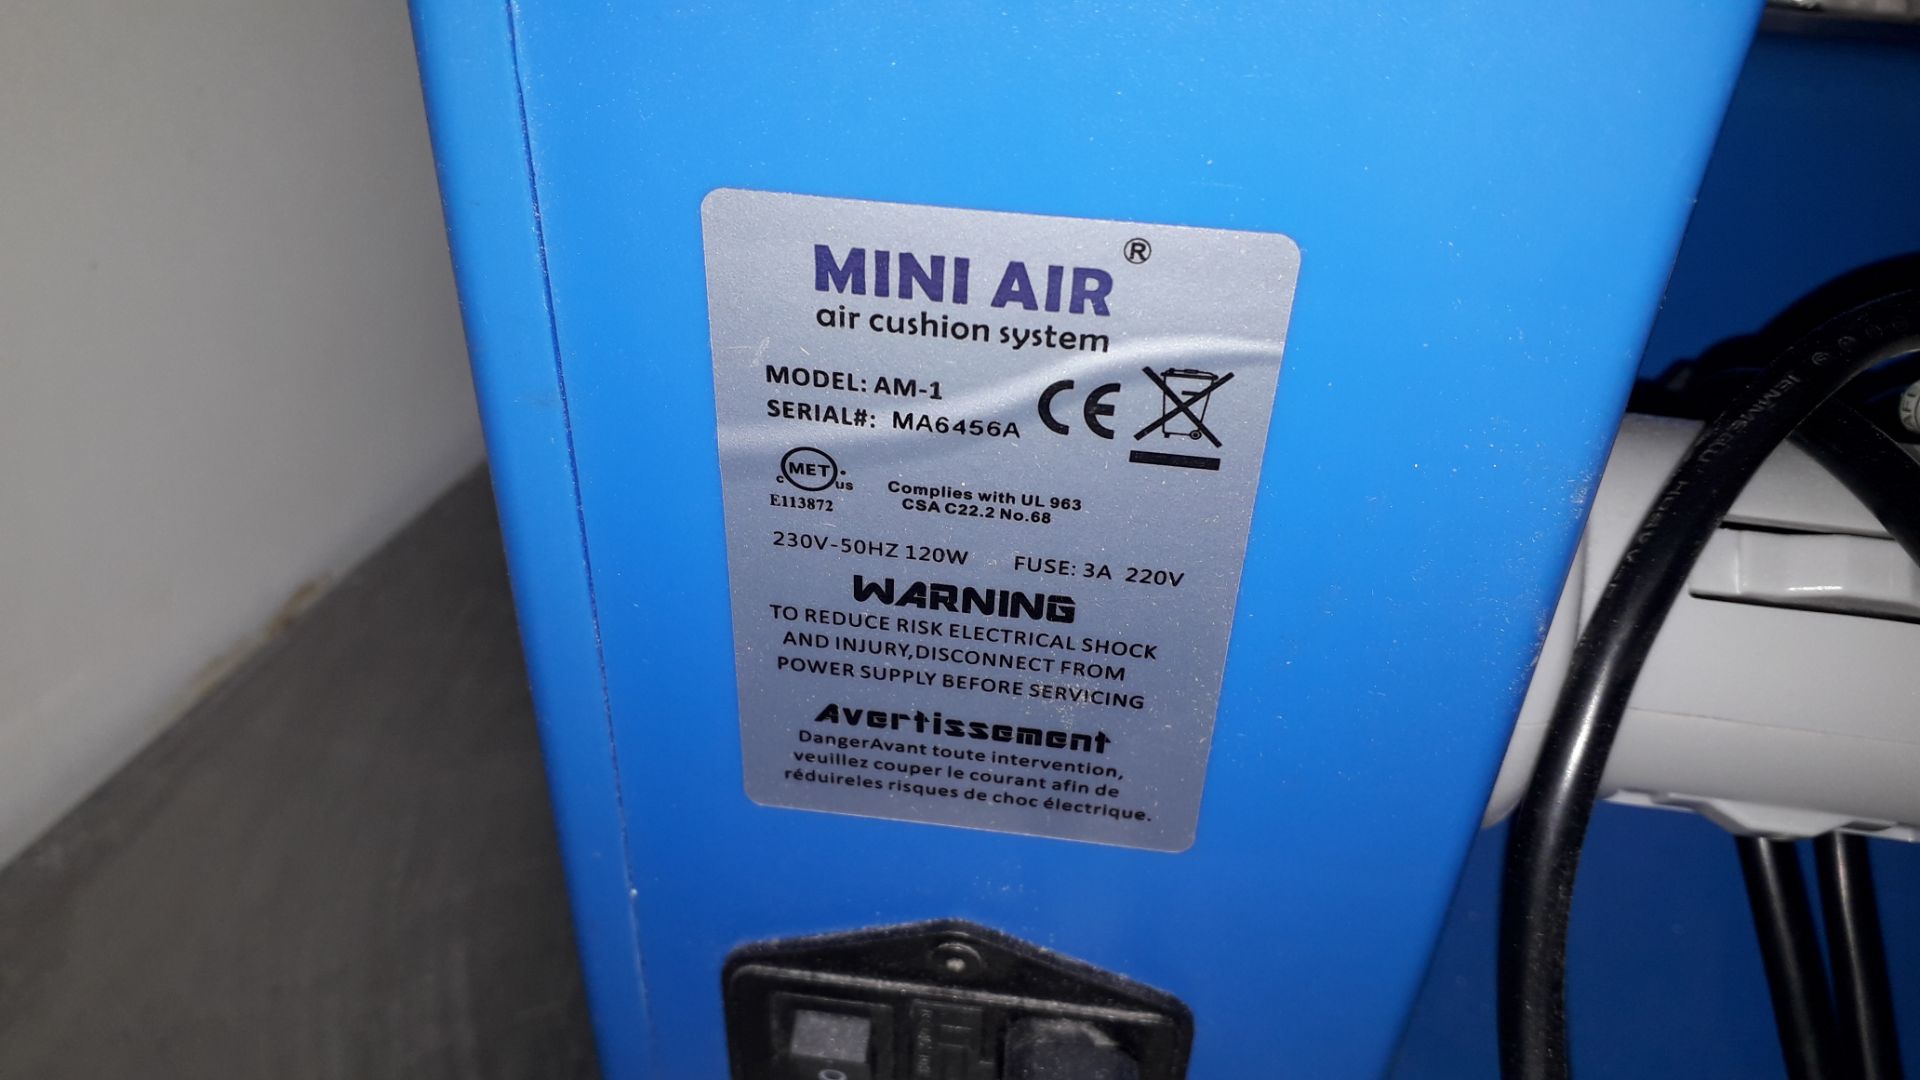 Kite Packaging MiniAir AM-I Air Cushion System Serial Number MA6456A - Image 2 of 2